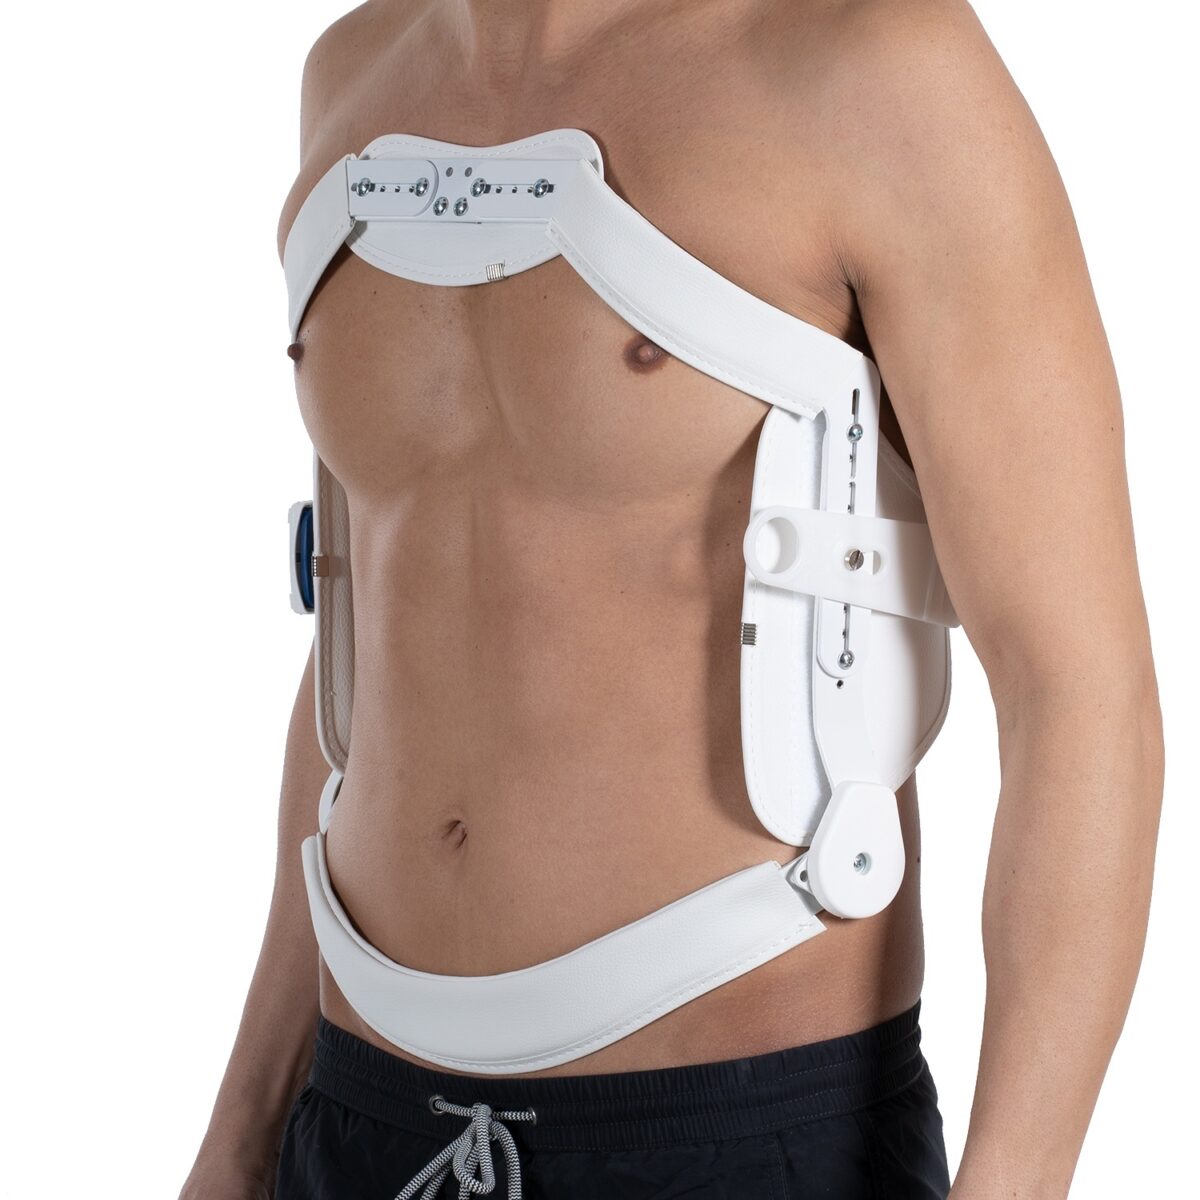 wingmed orthopedic equipments W431 dynamic hiperextension corset 55 2